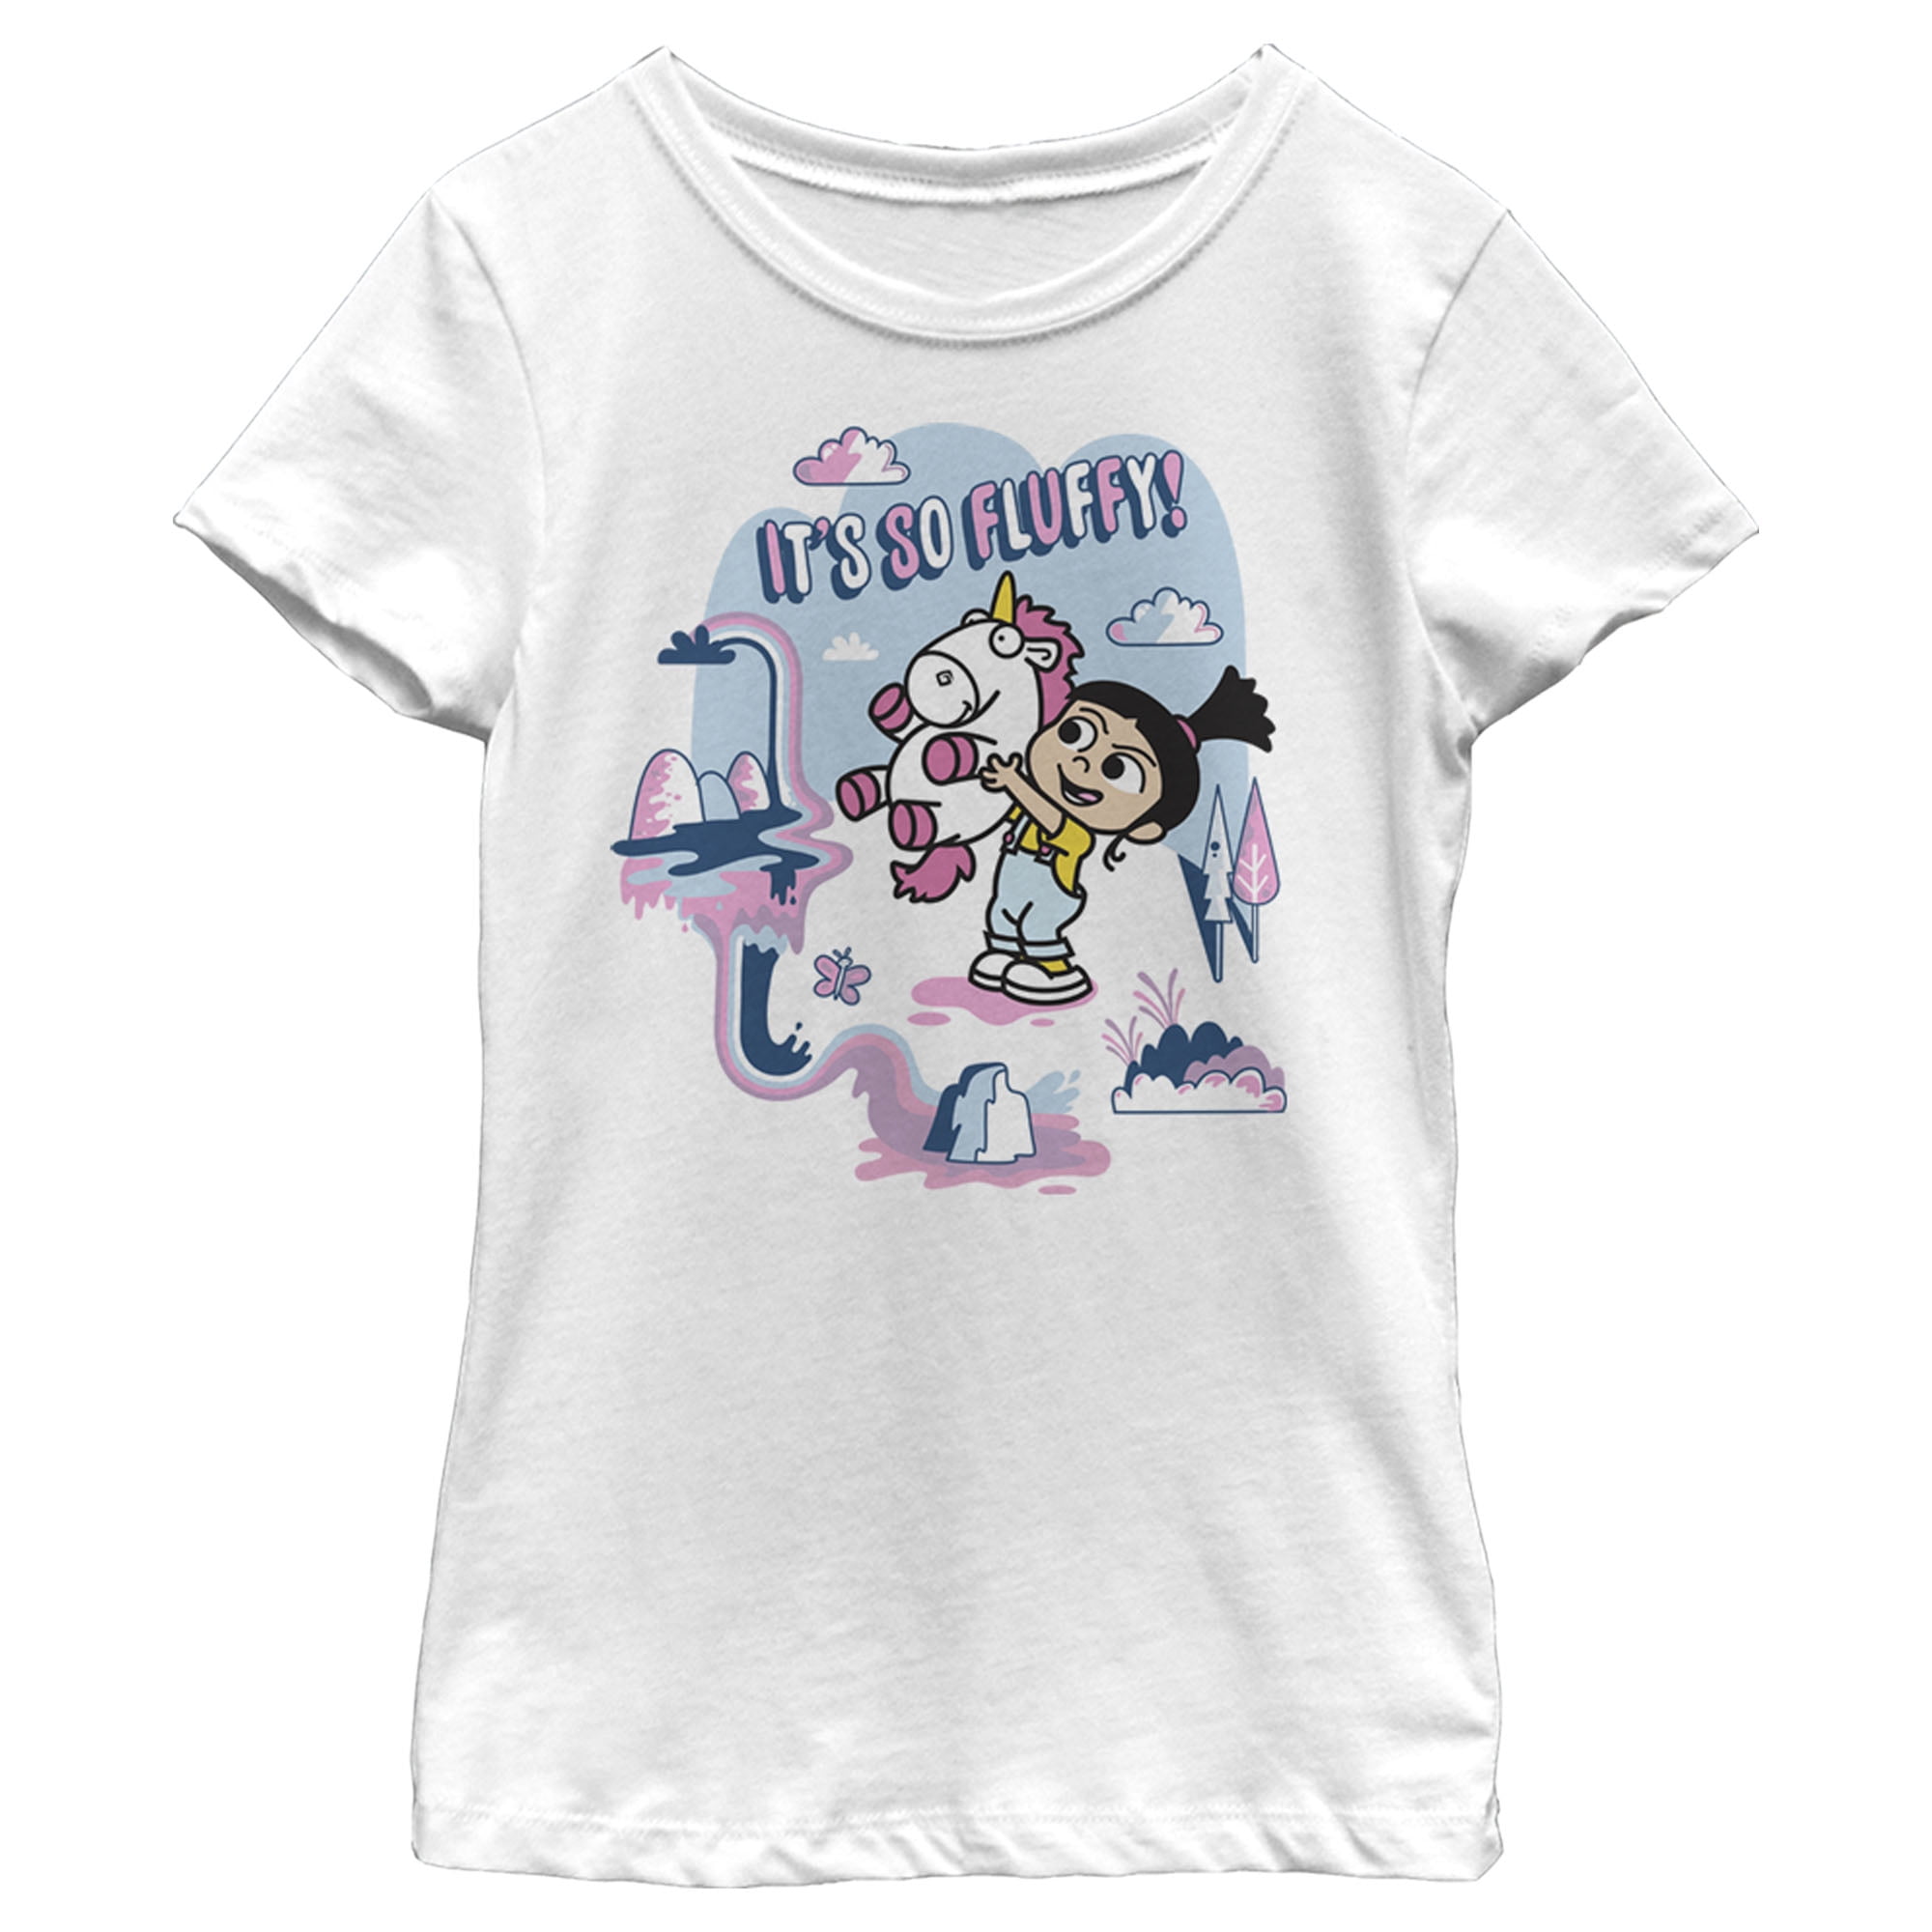 NEW 2018 Barbie Doll Despicable Me I Love Unicorns Pink T-Shirt Tee Top Clothing 